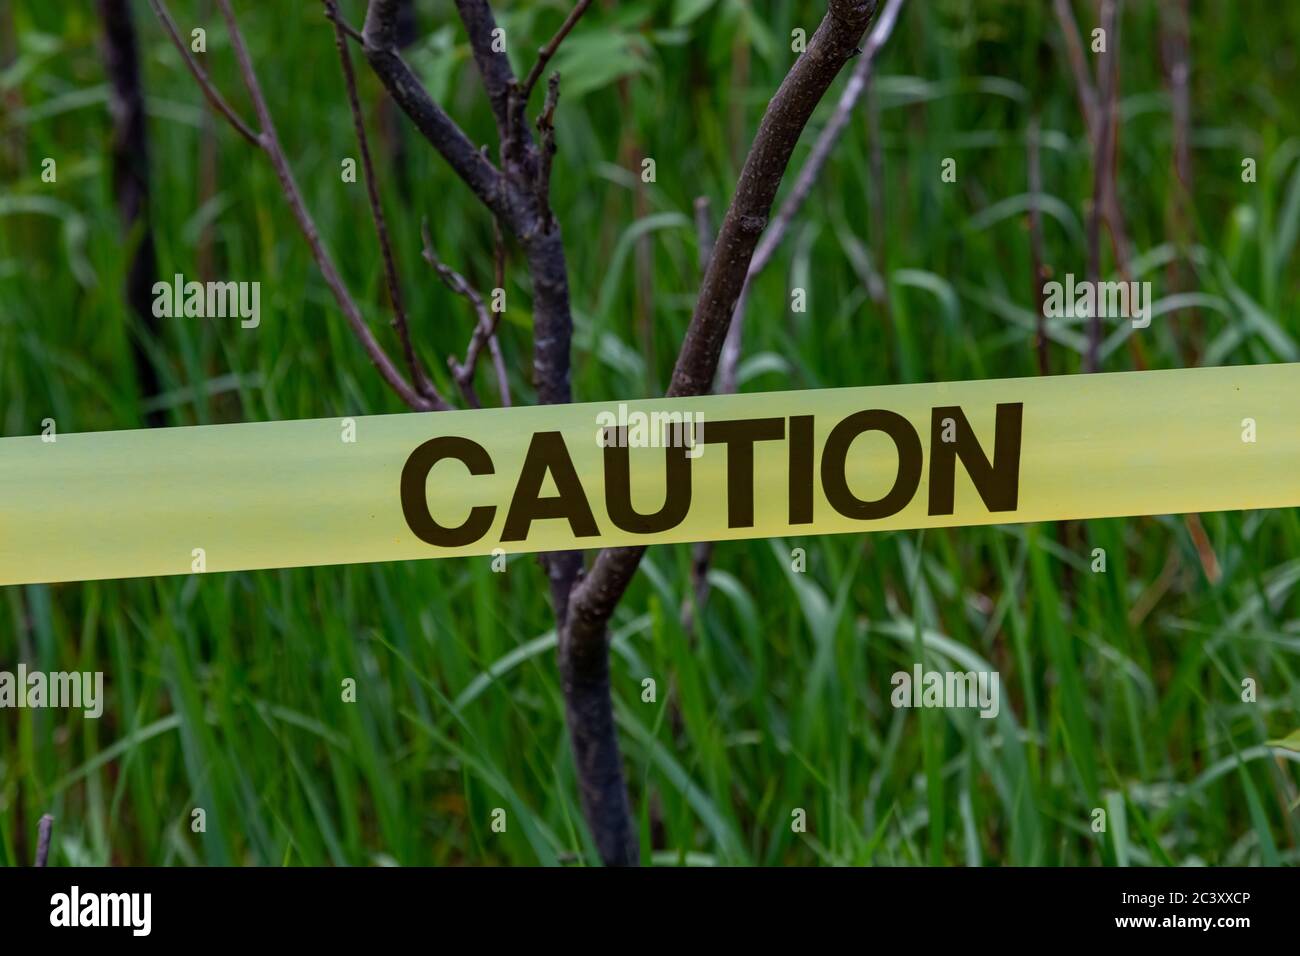 Yellow caution tape is stretched across an outdoor, natural area in front of grass and thin trees. Stock Photo